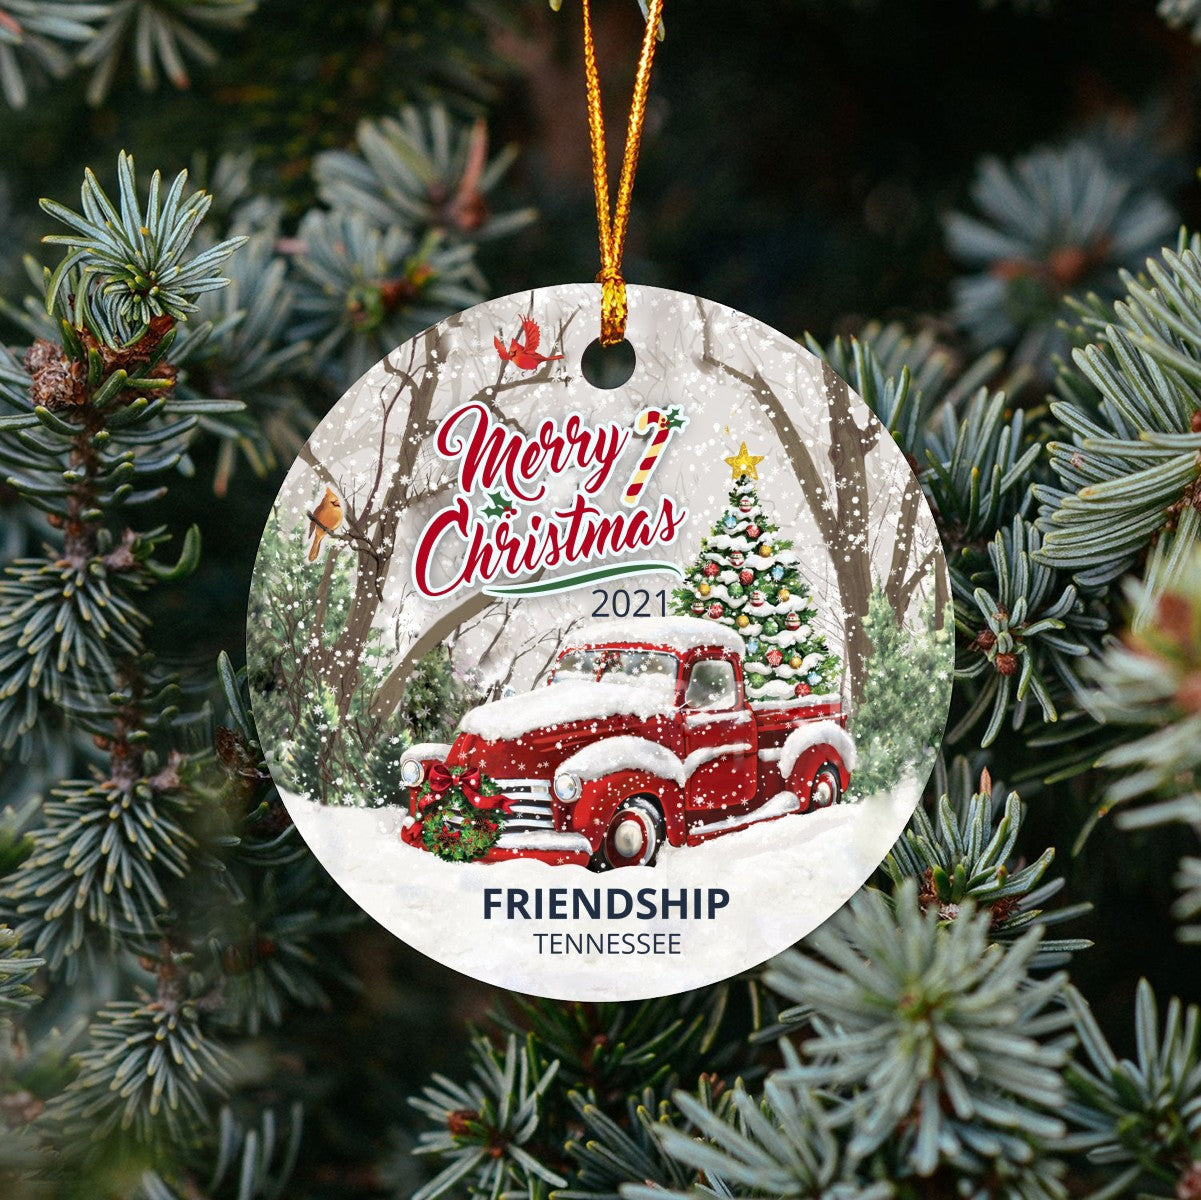 Christmas Tree Ornaments Friendship - Ornament With Name City, State Friendship Tennessee TN Ornament - Red Truck Xmas Ornaments 3'' Plastic Gift For Family, Friend And Housewarming